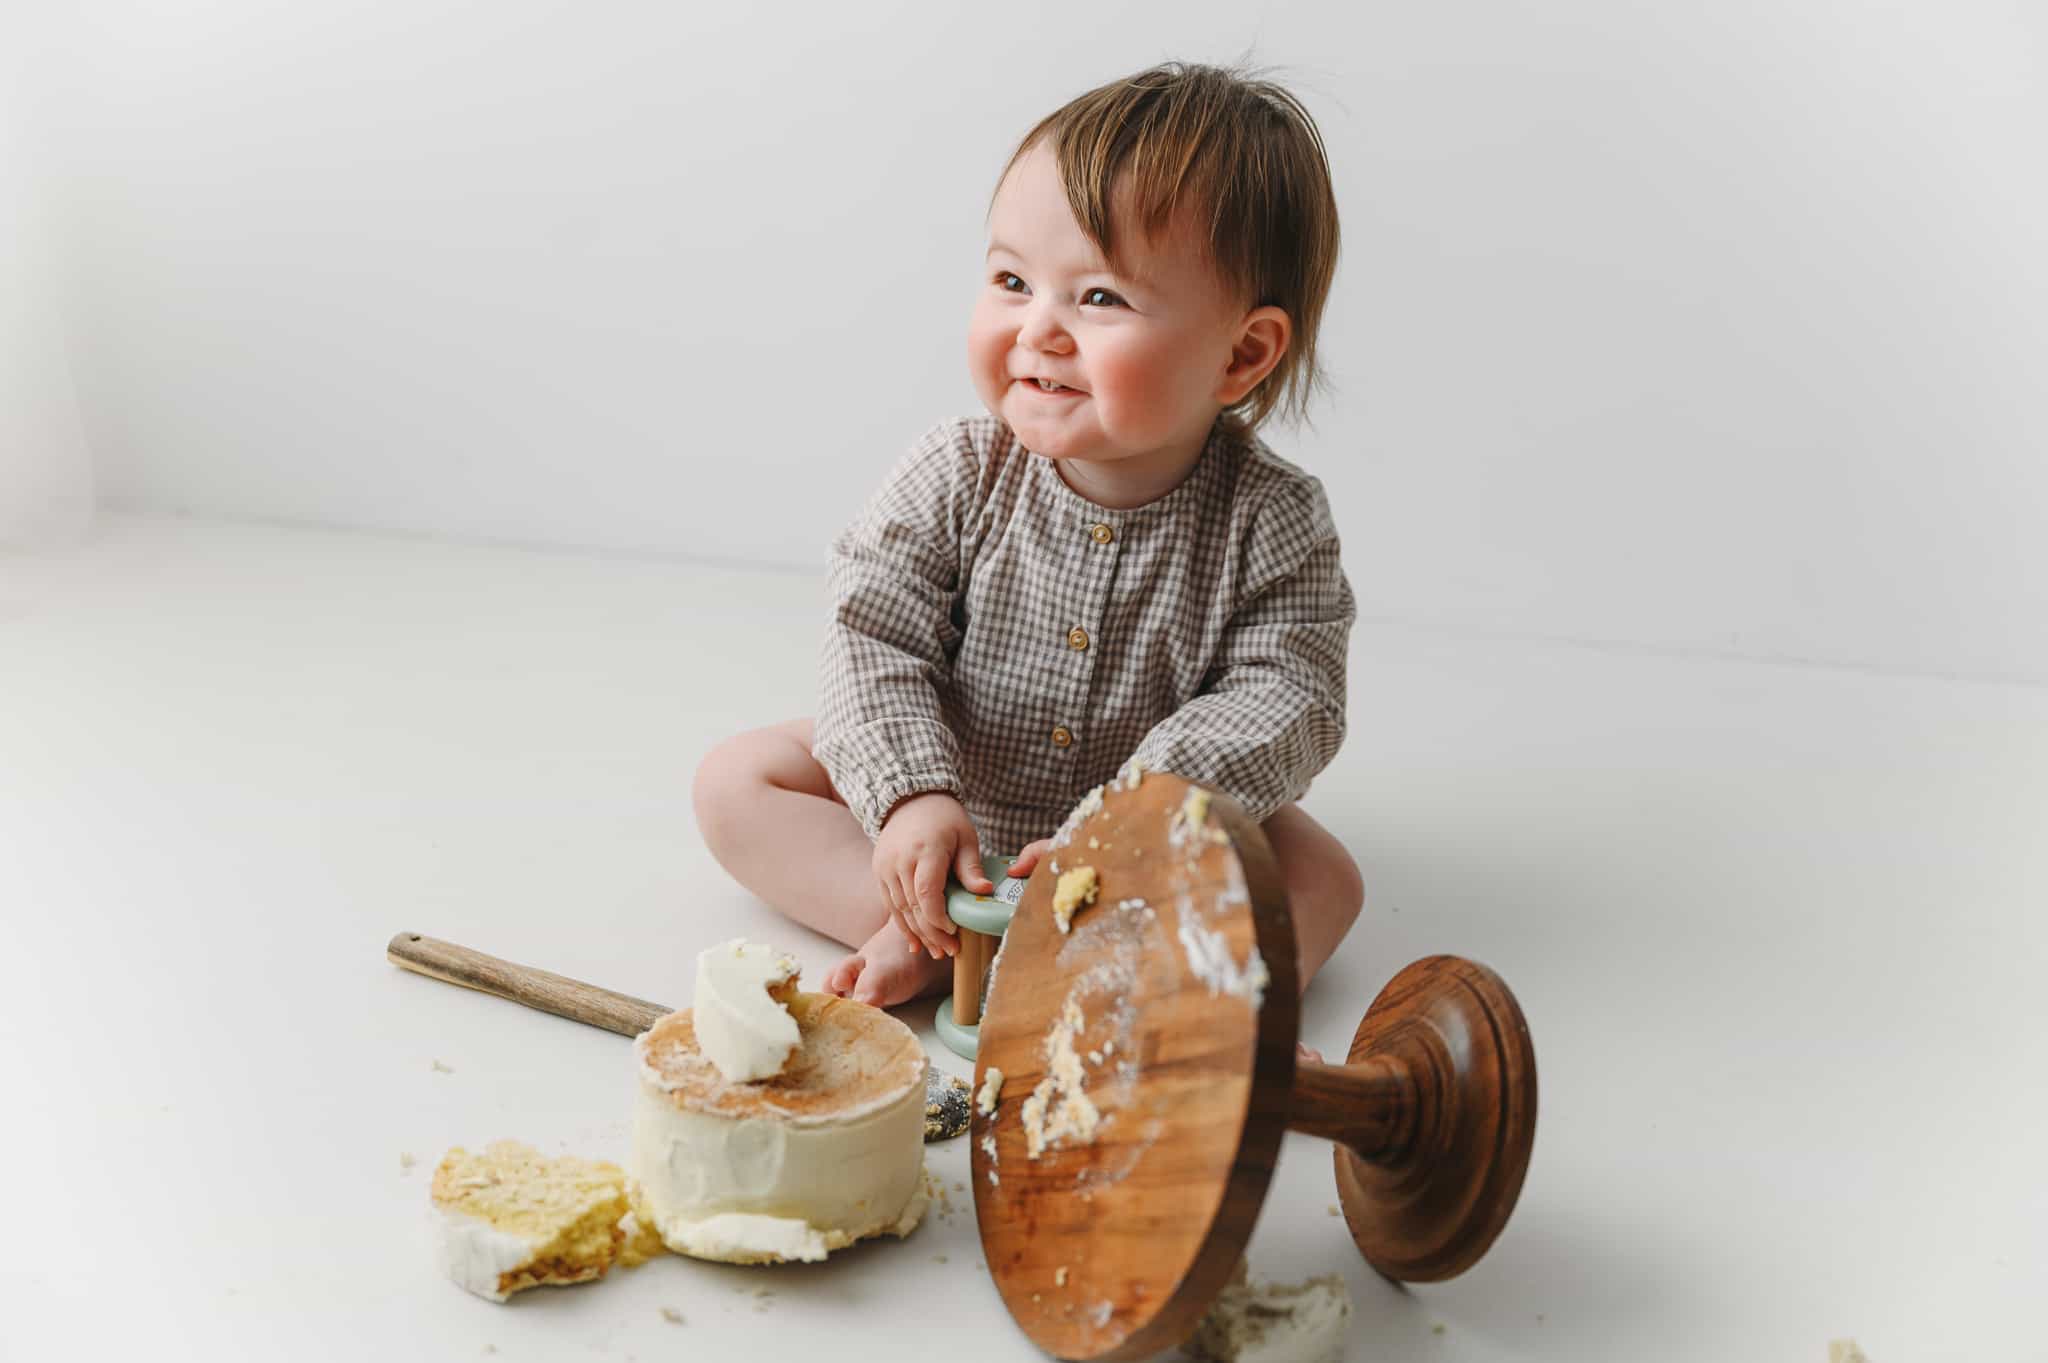 photo of a 1 year old girl smiling with smashed cake all over the floor